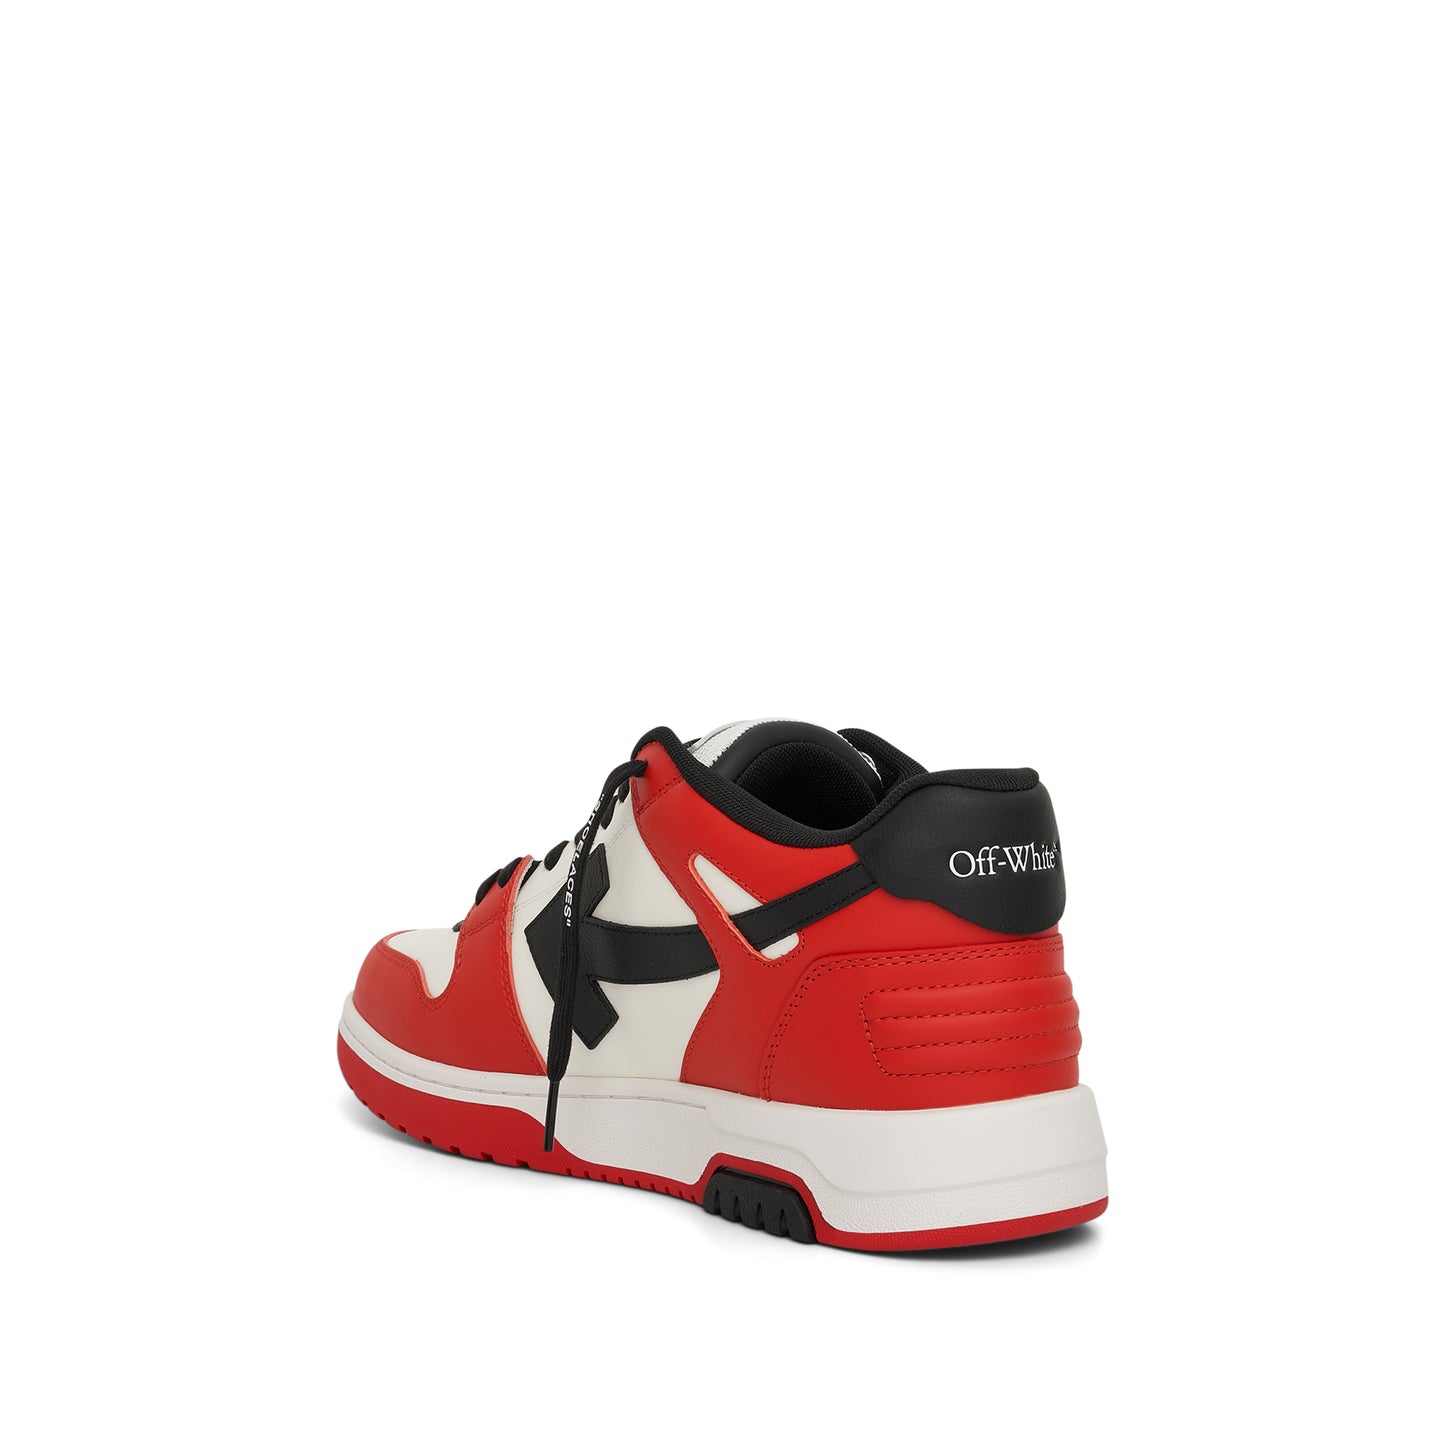 Out of Office Calf Leather Sneaker in Red/White/Black